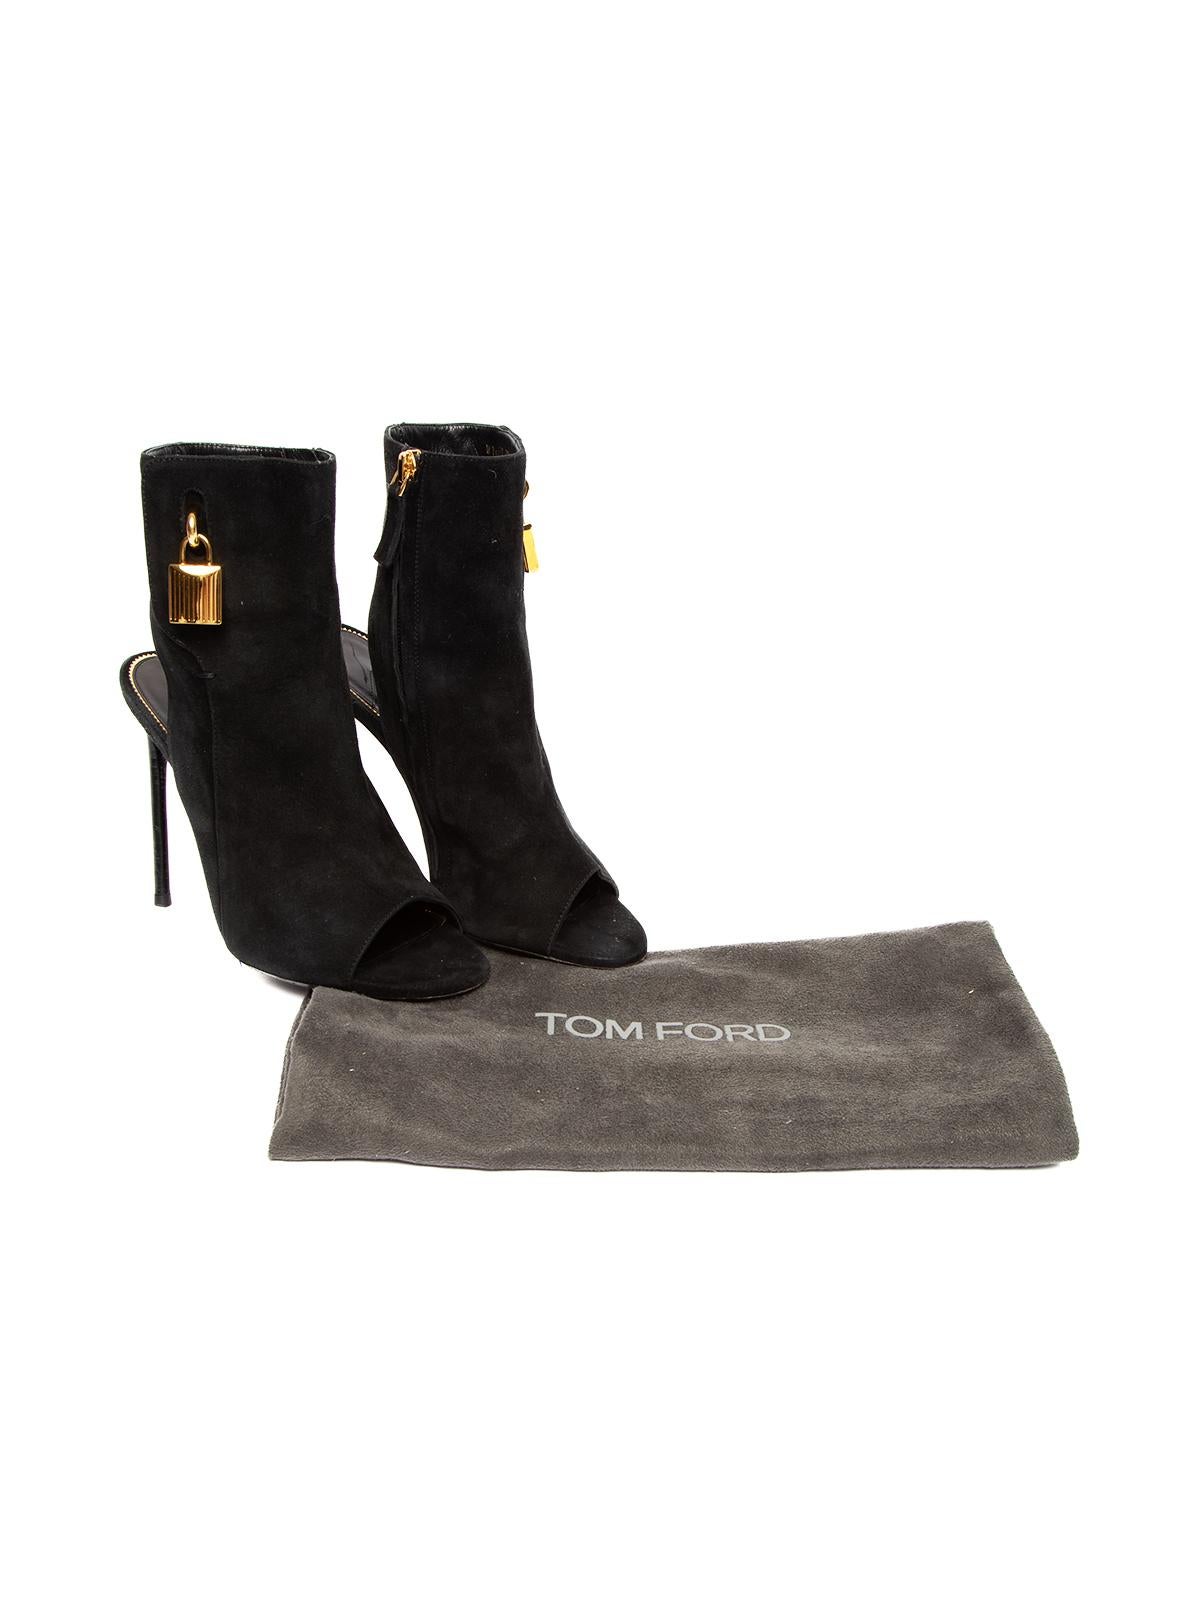 CONDITION is Good. Some wear to heels is evident. Slightly visible scratches to heel, piling to suede and creases to interior leather on this used Tom Ford designer resale item. Details Black Suede Open toe Stiletto heel Cut out back Lock accessory